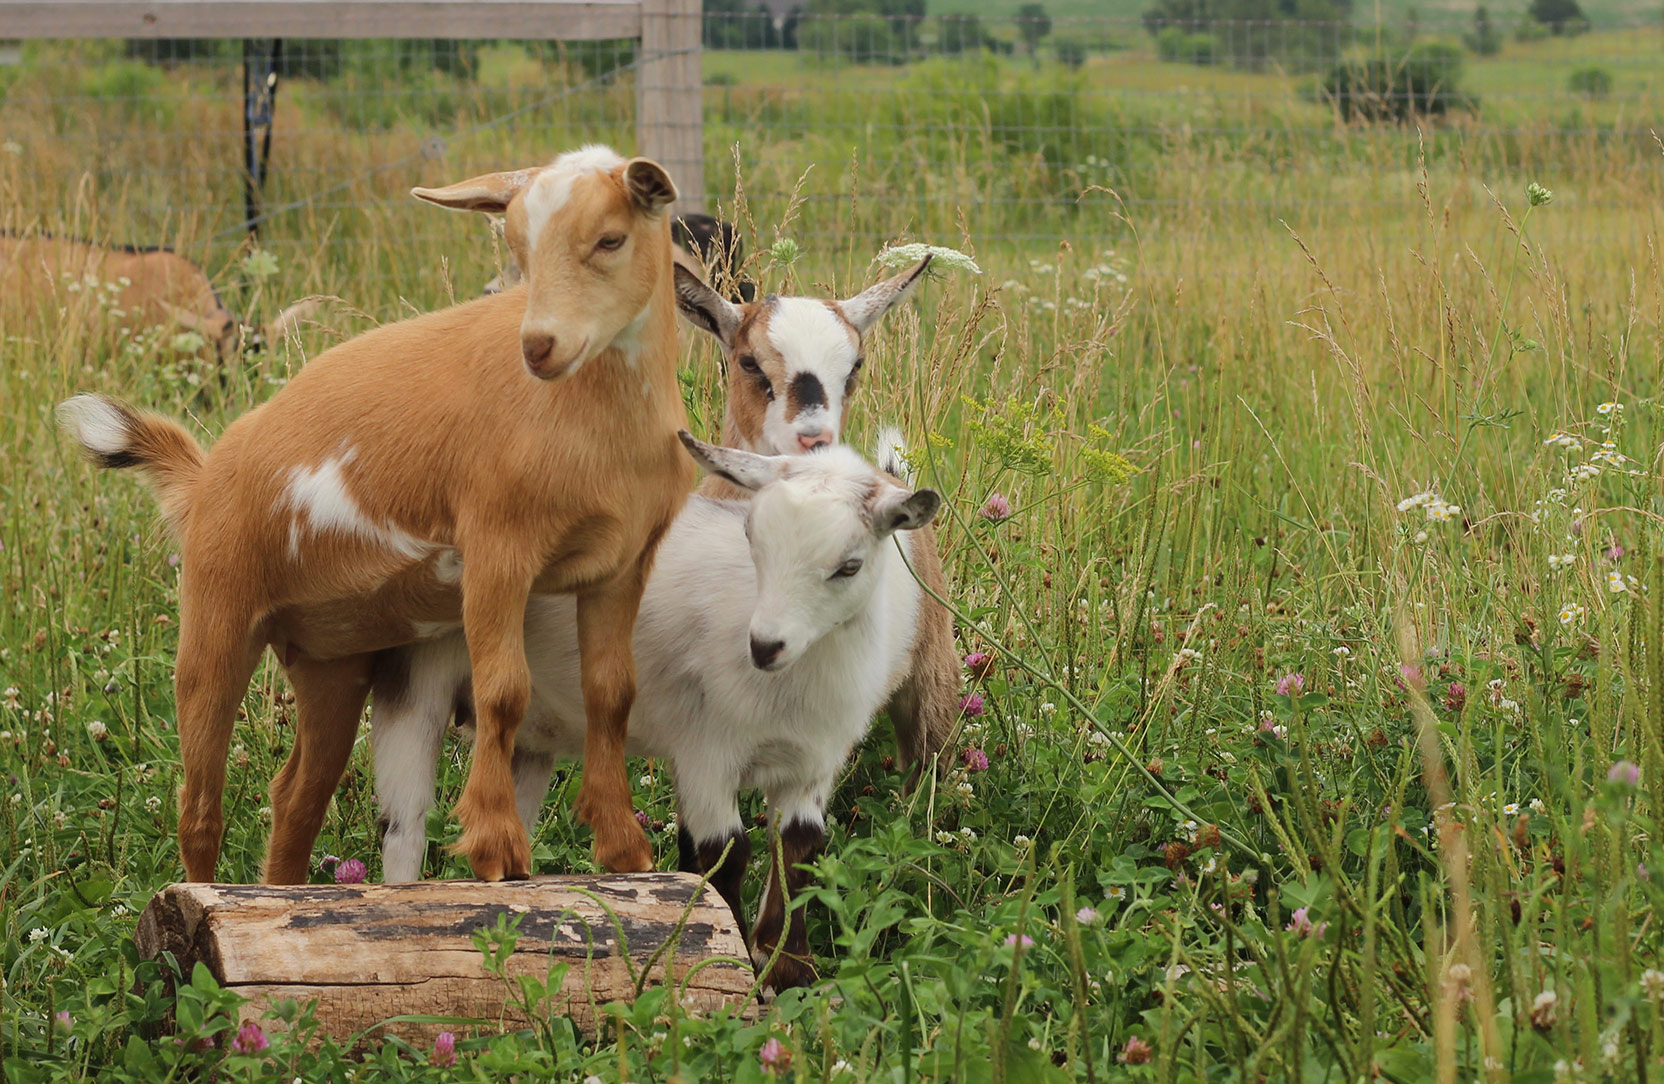 Three goat kids standing close together in a pasture